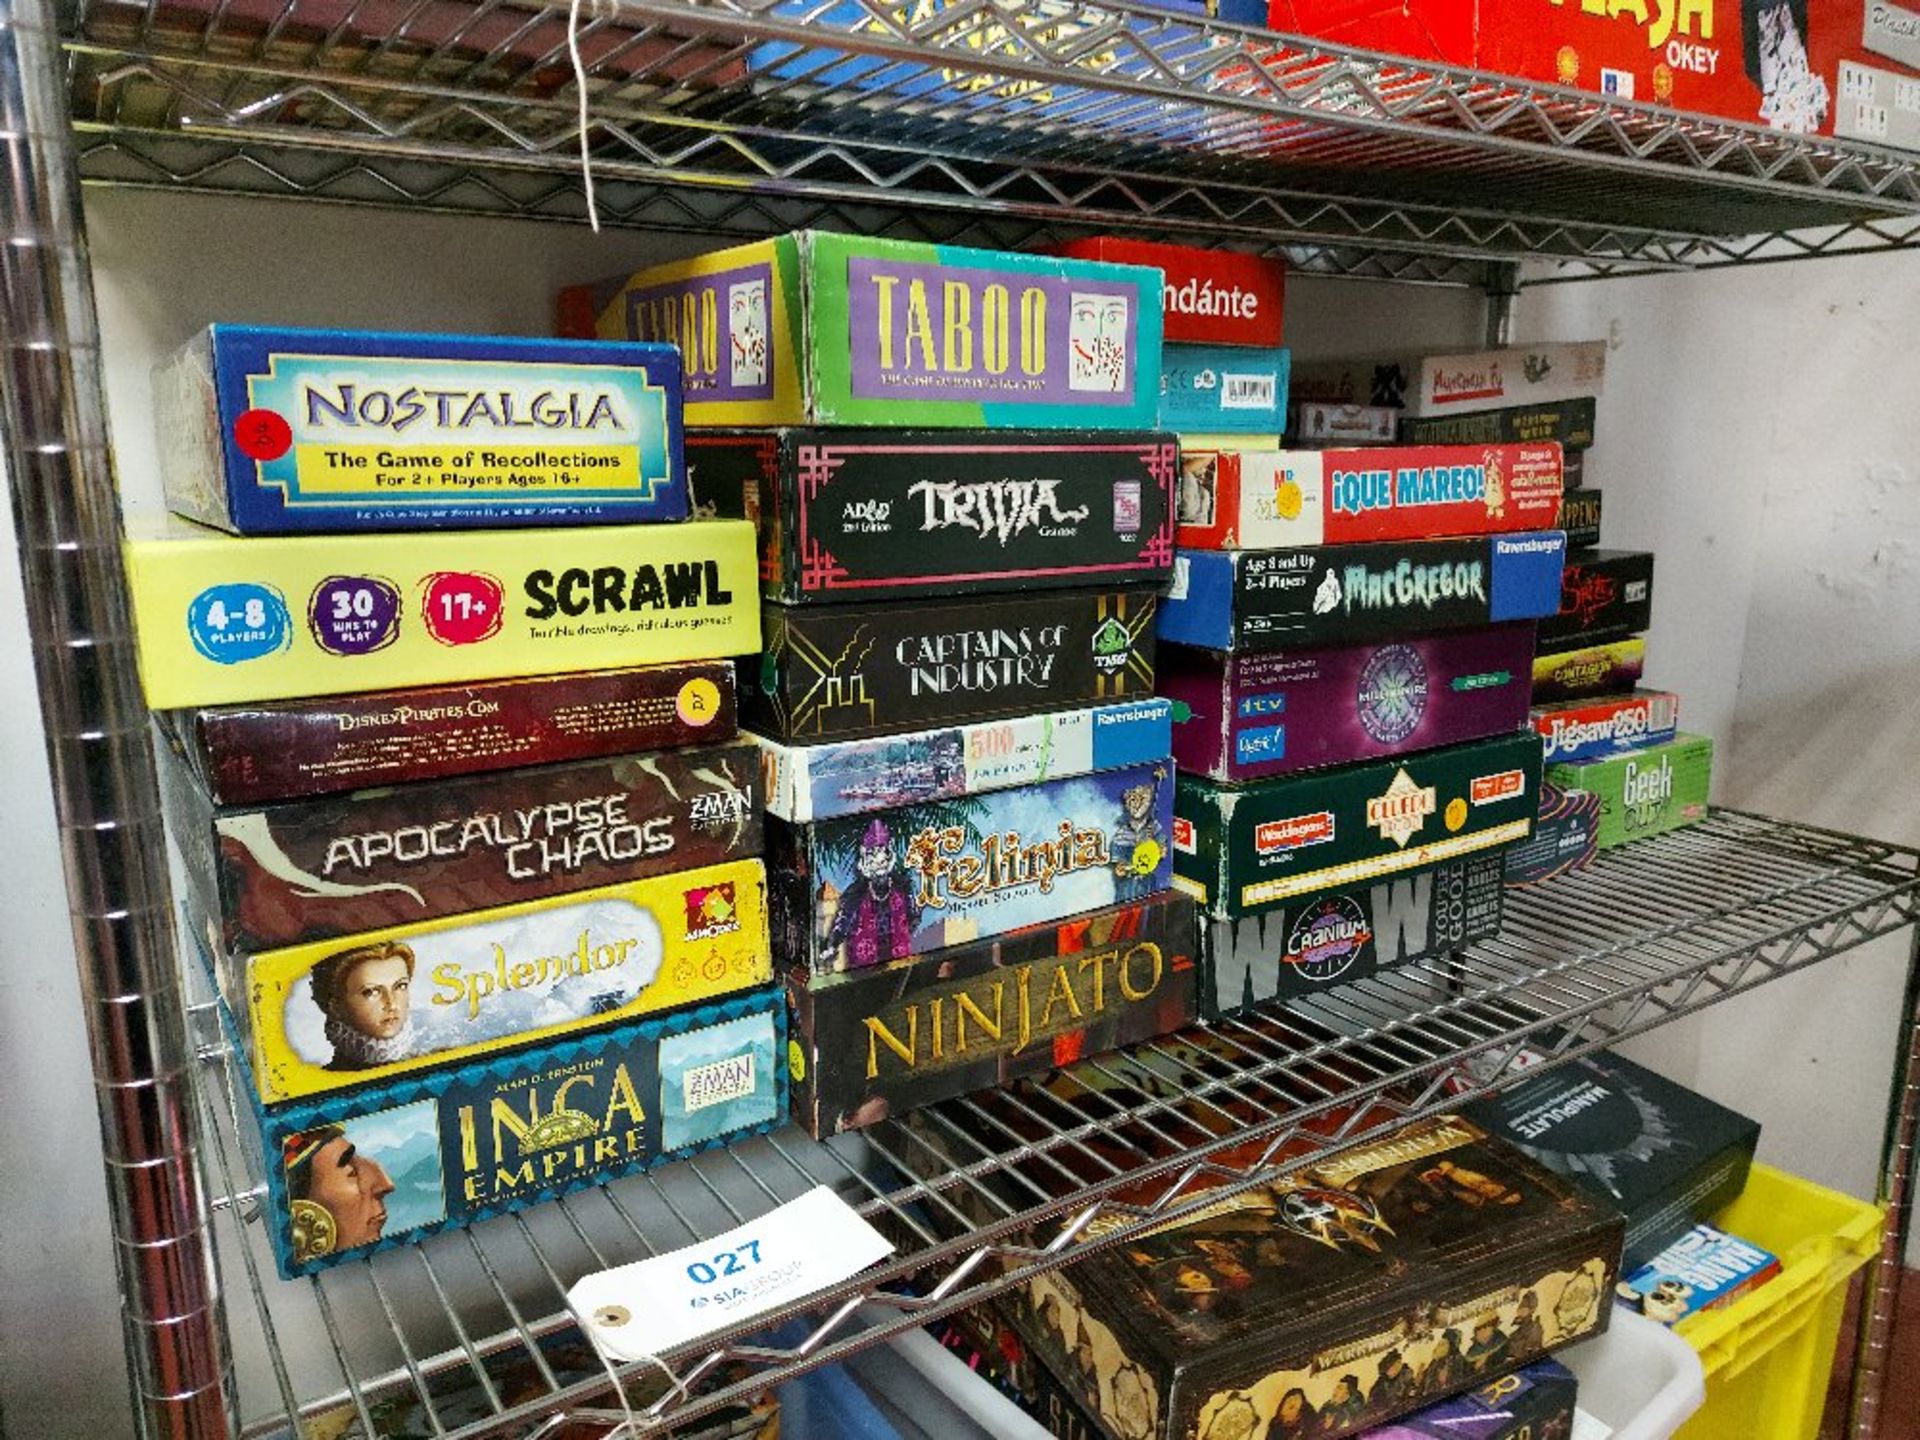 Contents of shelf to include quantity of board games